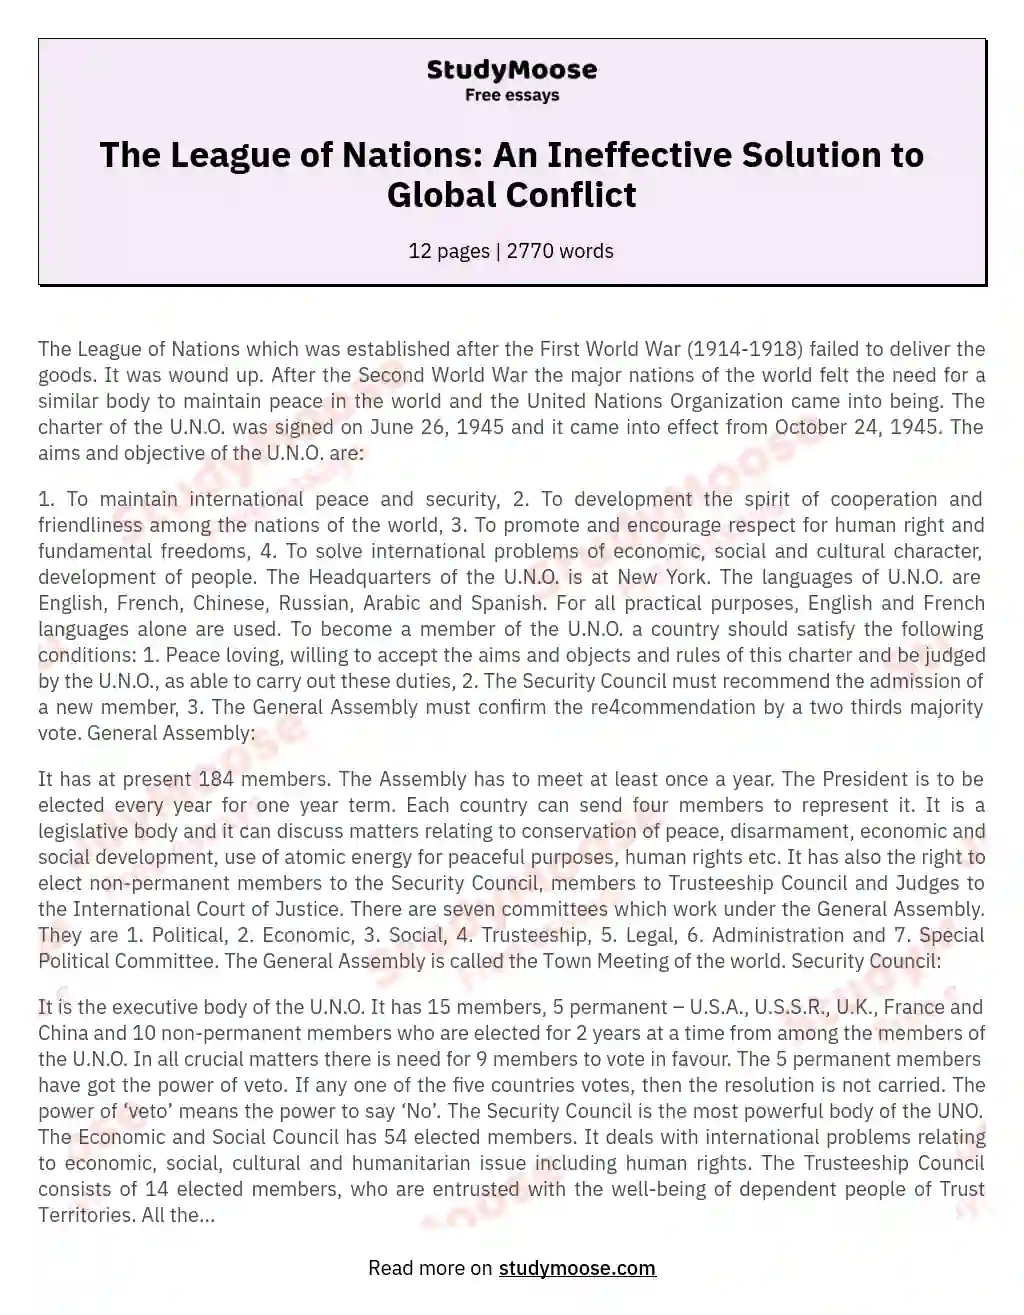 The League of Nations: An Ineffective Solution to Global Conflict essay